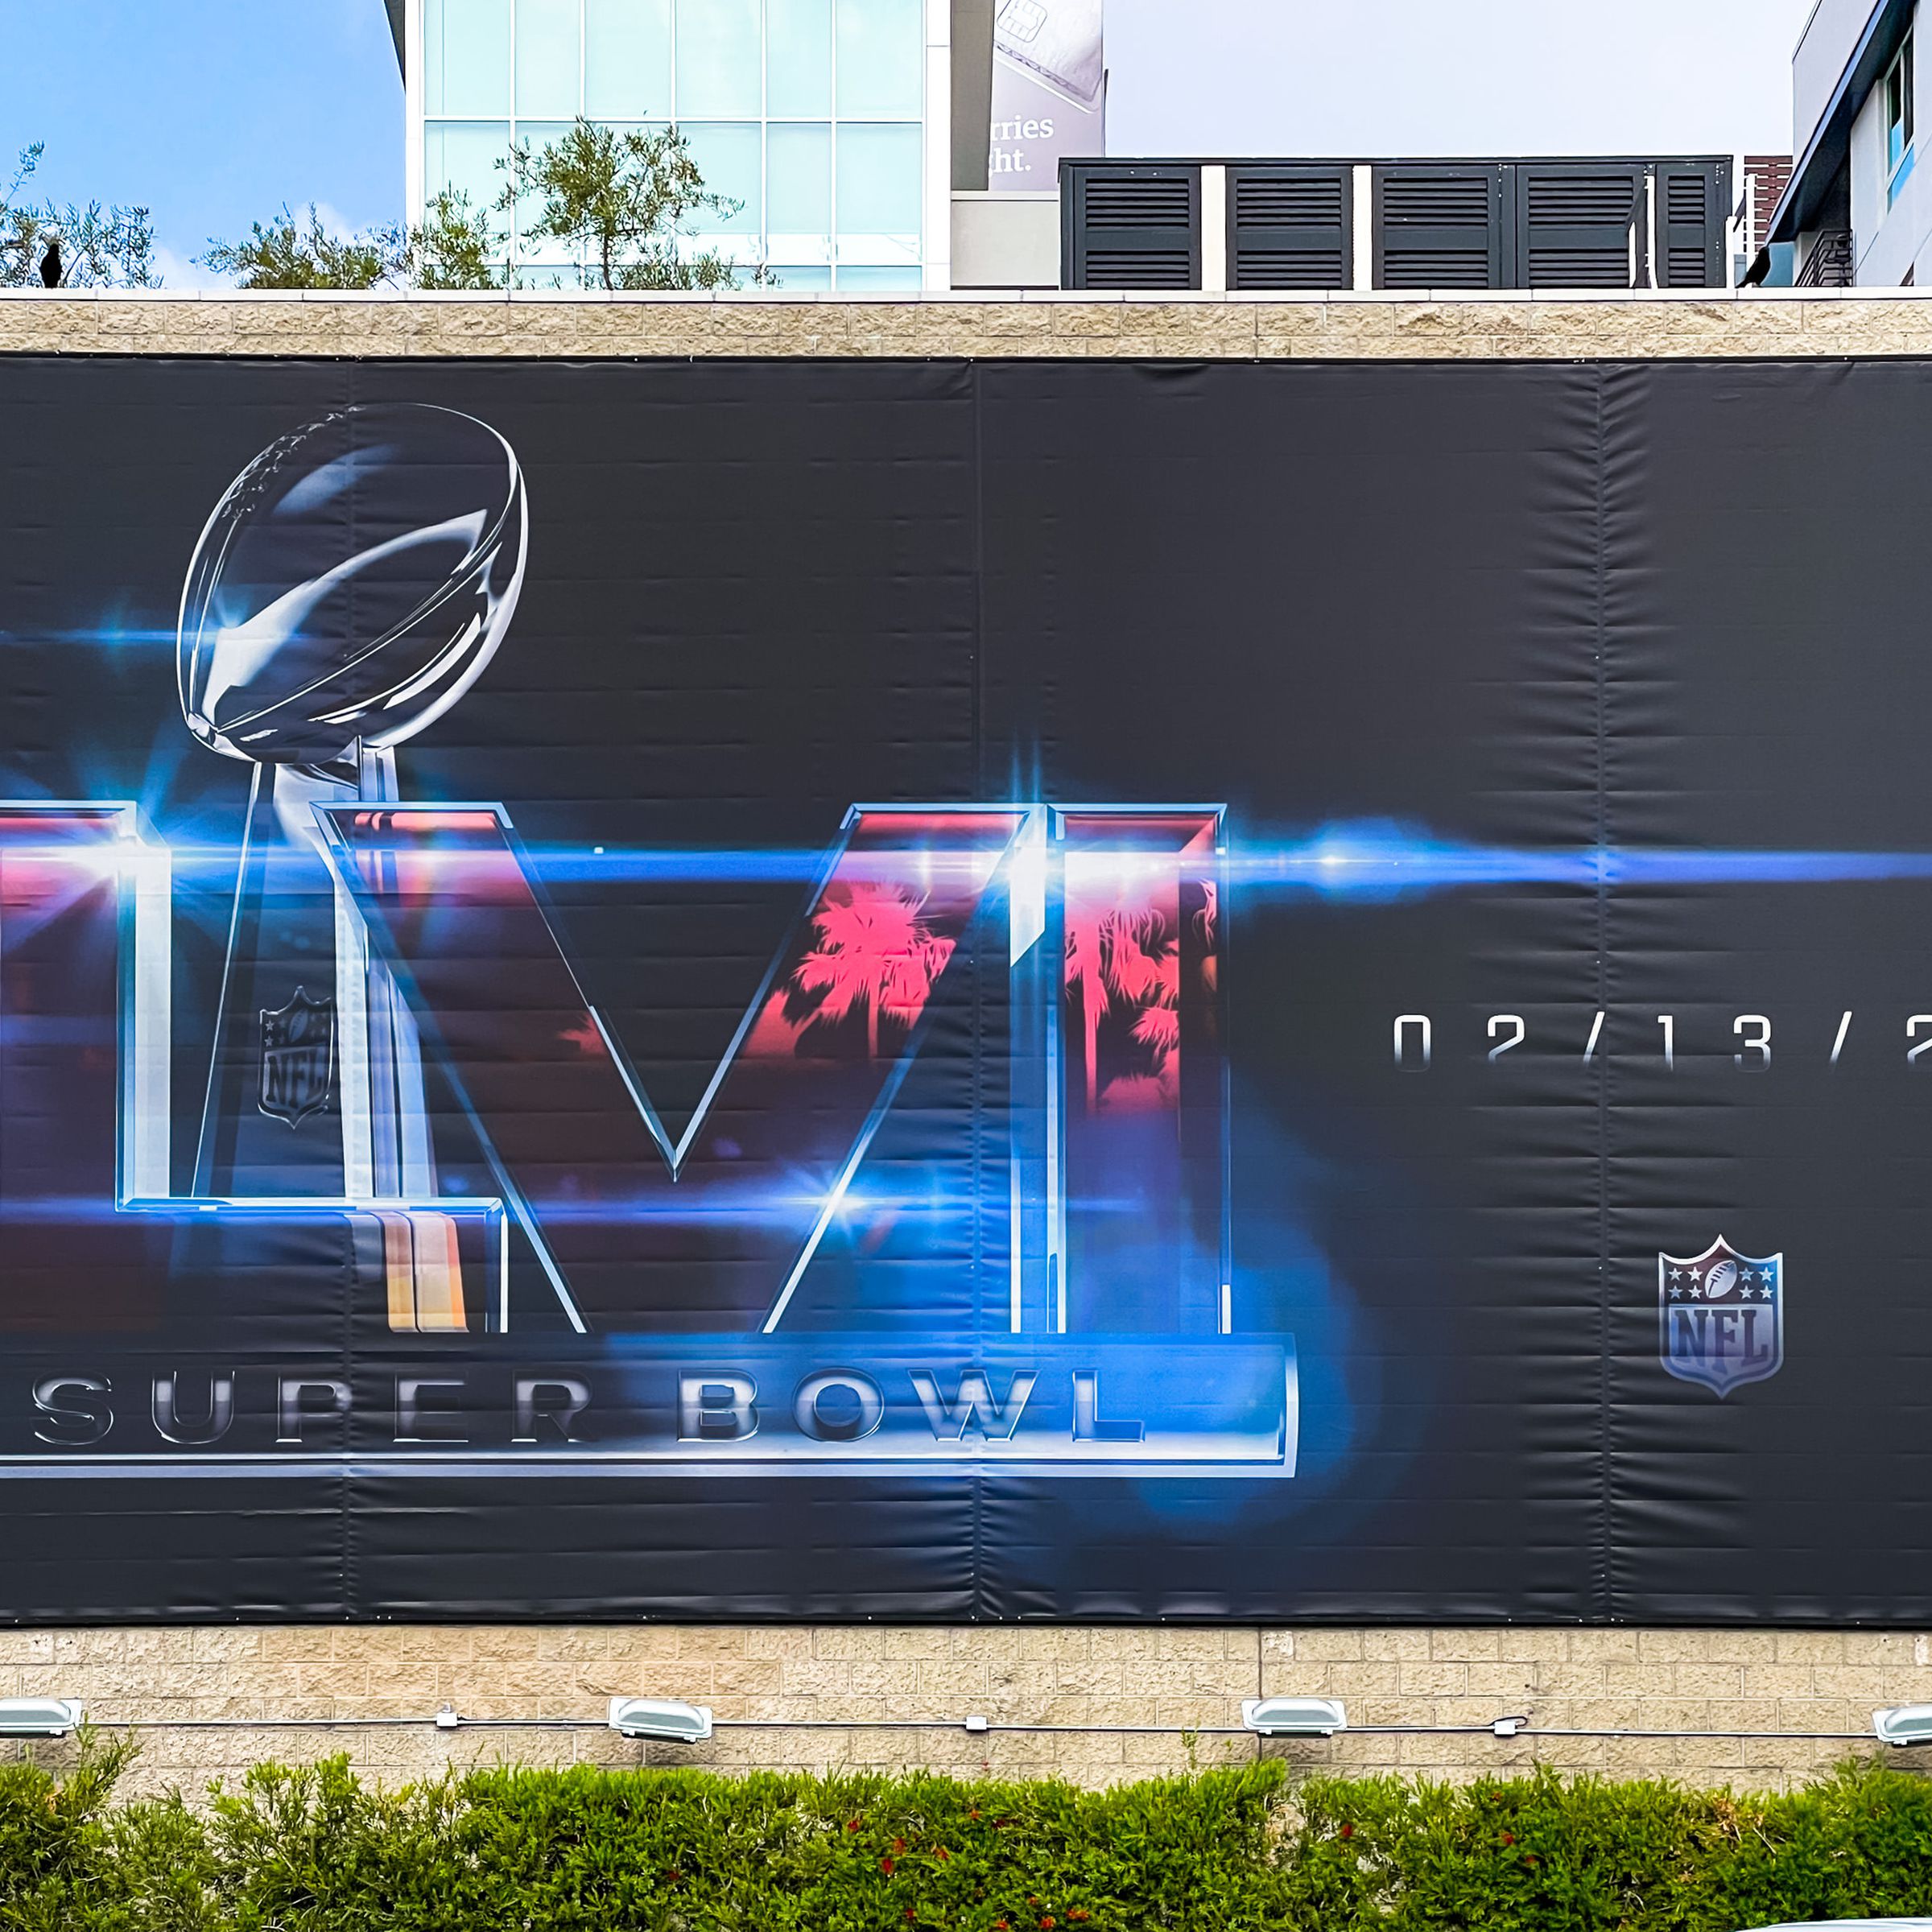 A poster in Los Angeles promoting Super Bowl 56, featuring the Super Bowl LVI logo, an image of the Vince Lombardi Trophy, the NFL’s logo, and the date for the Super Bowl — 2/13/22.